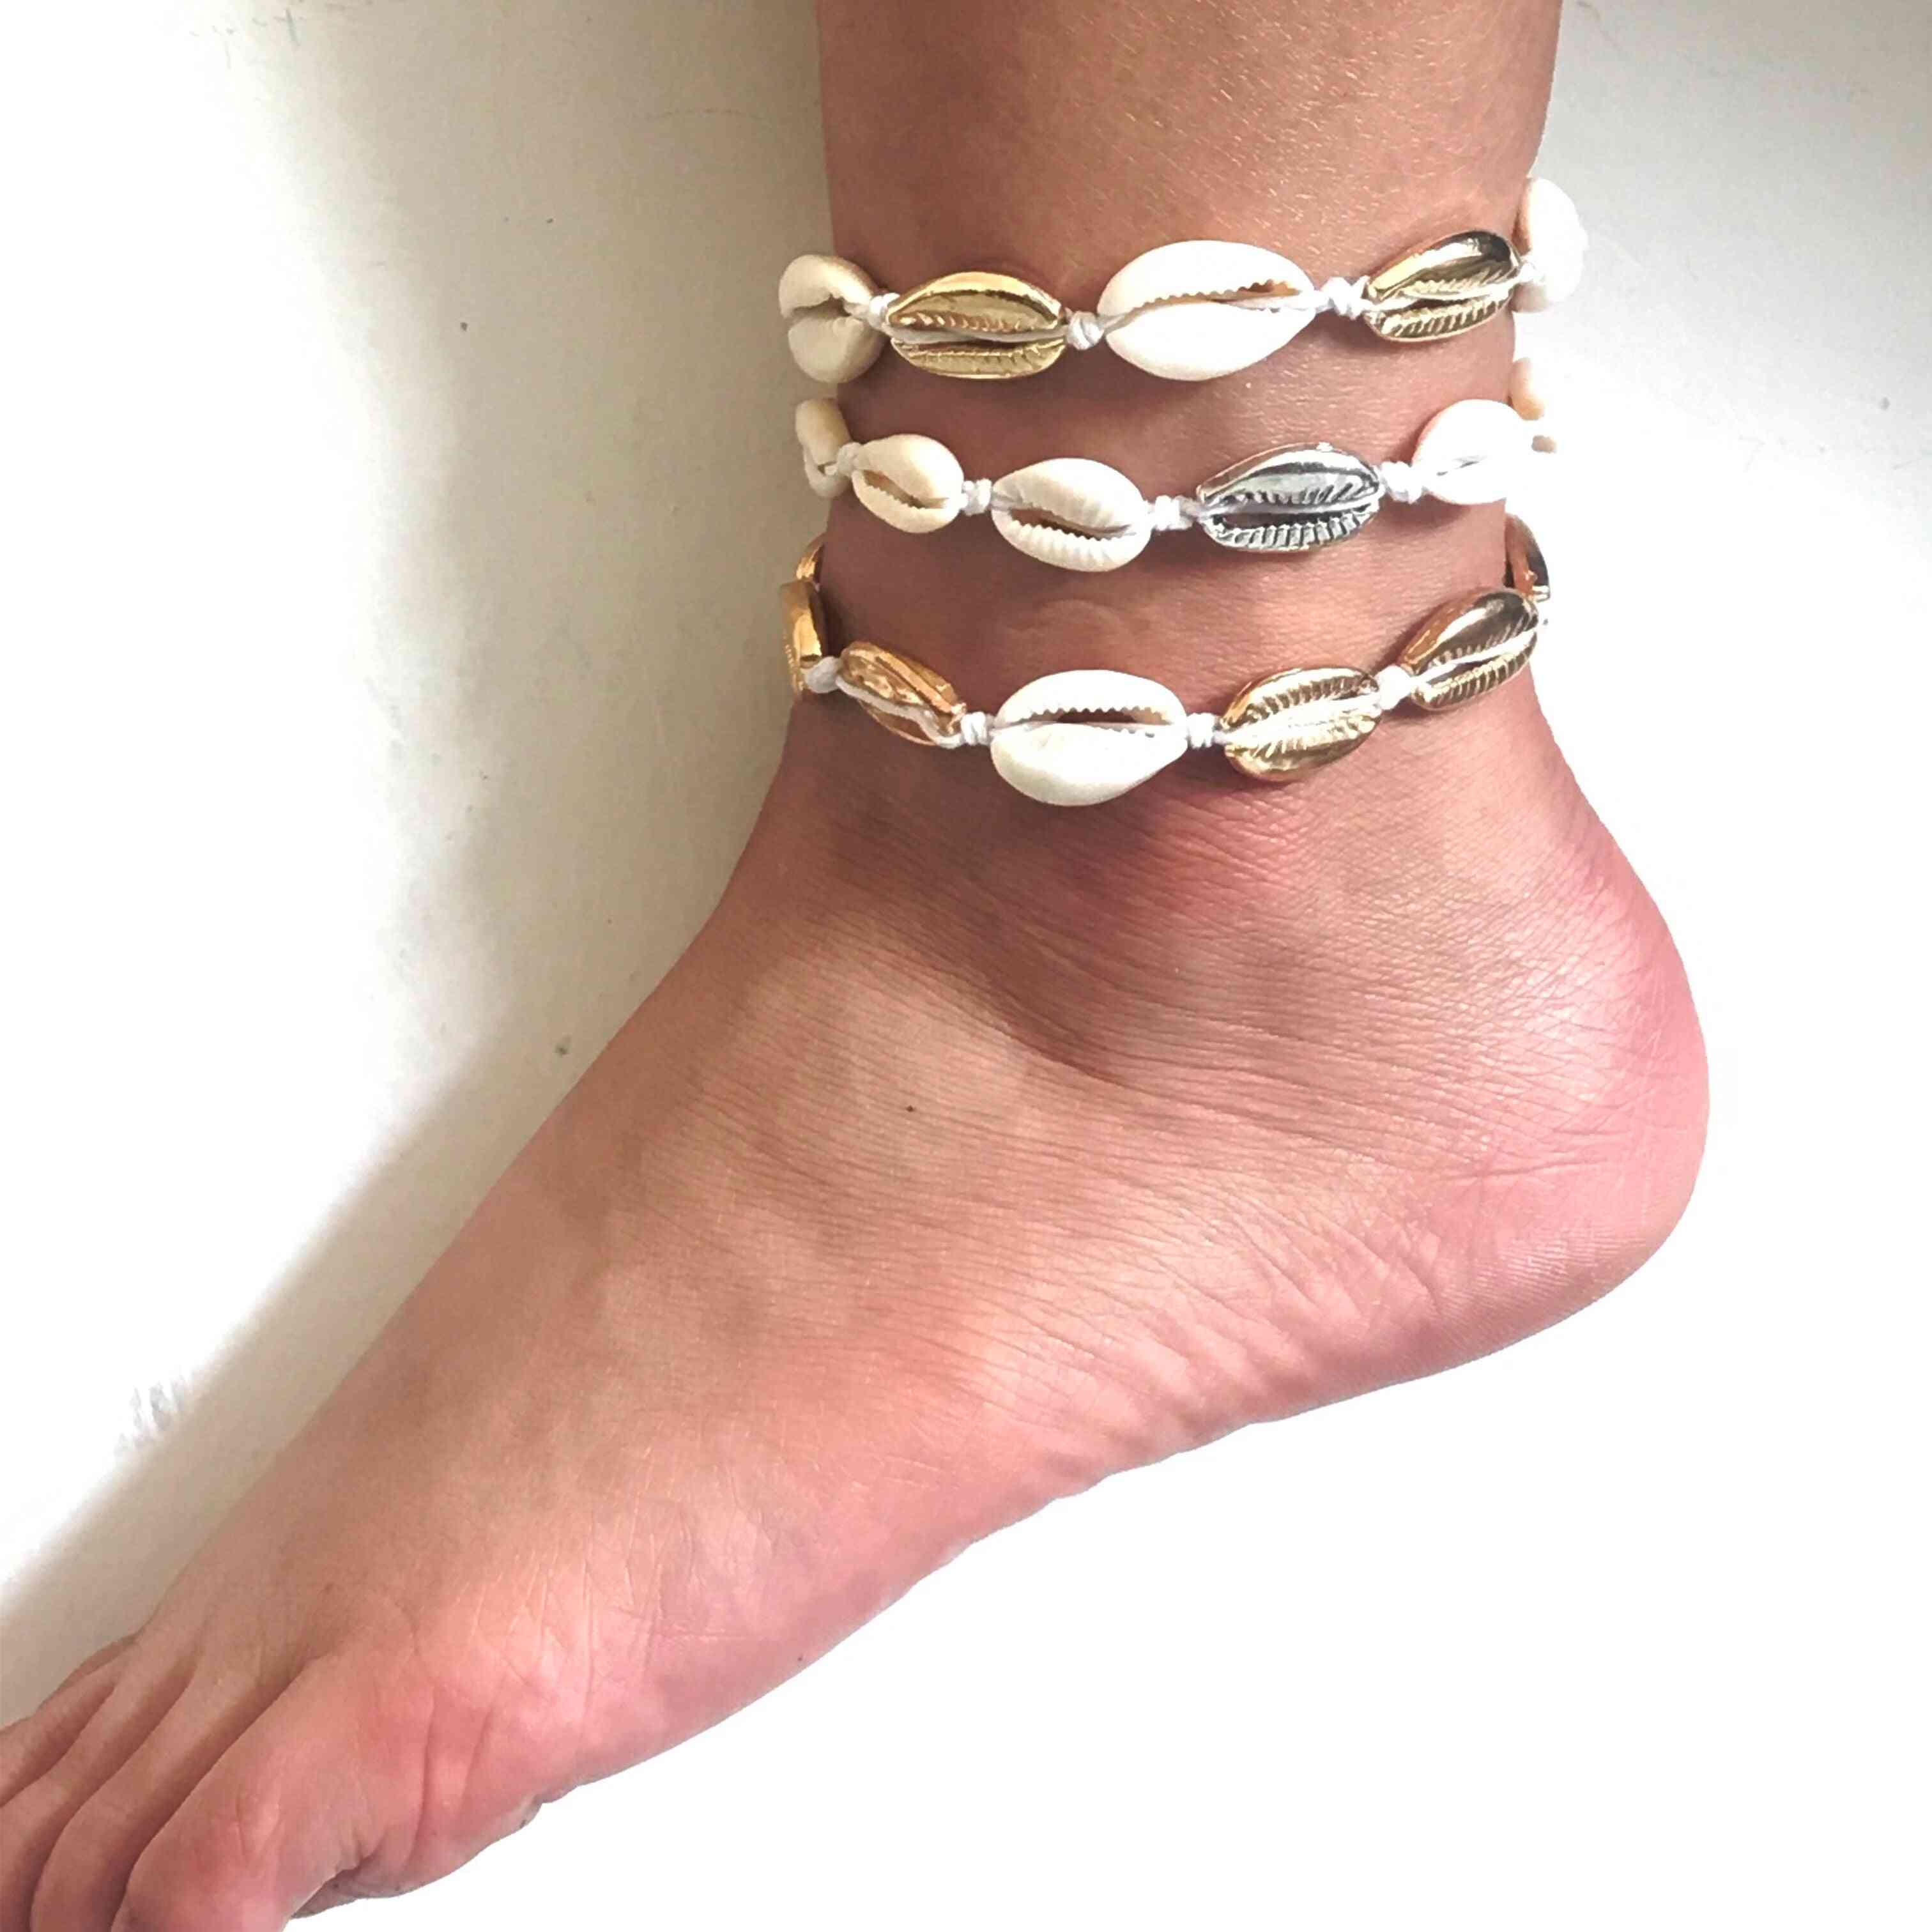 Anklets, Shell Foot Jewelry, Summer Beach Barefoot Bracelet Ankle On Leg, Strap Bohemian Accessories